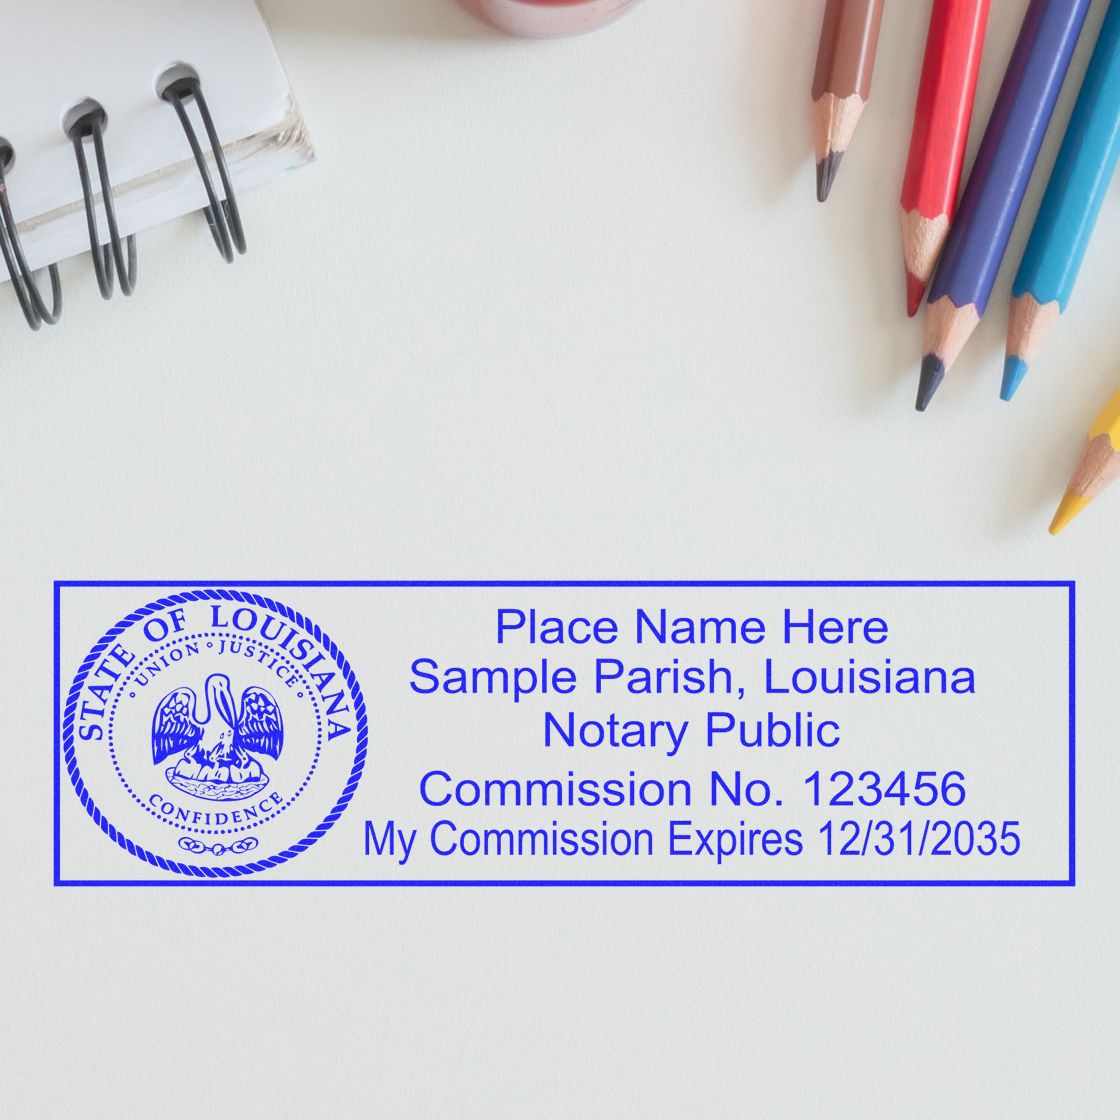 The MaxLight Premium Pre-Inked Louisiana State Seal Notarial Stamp stamp impression comes to life with a crisp, detailed photo on paper - showcasing true professional quality.